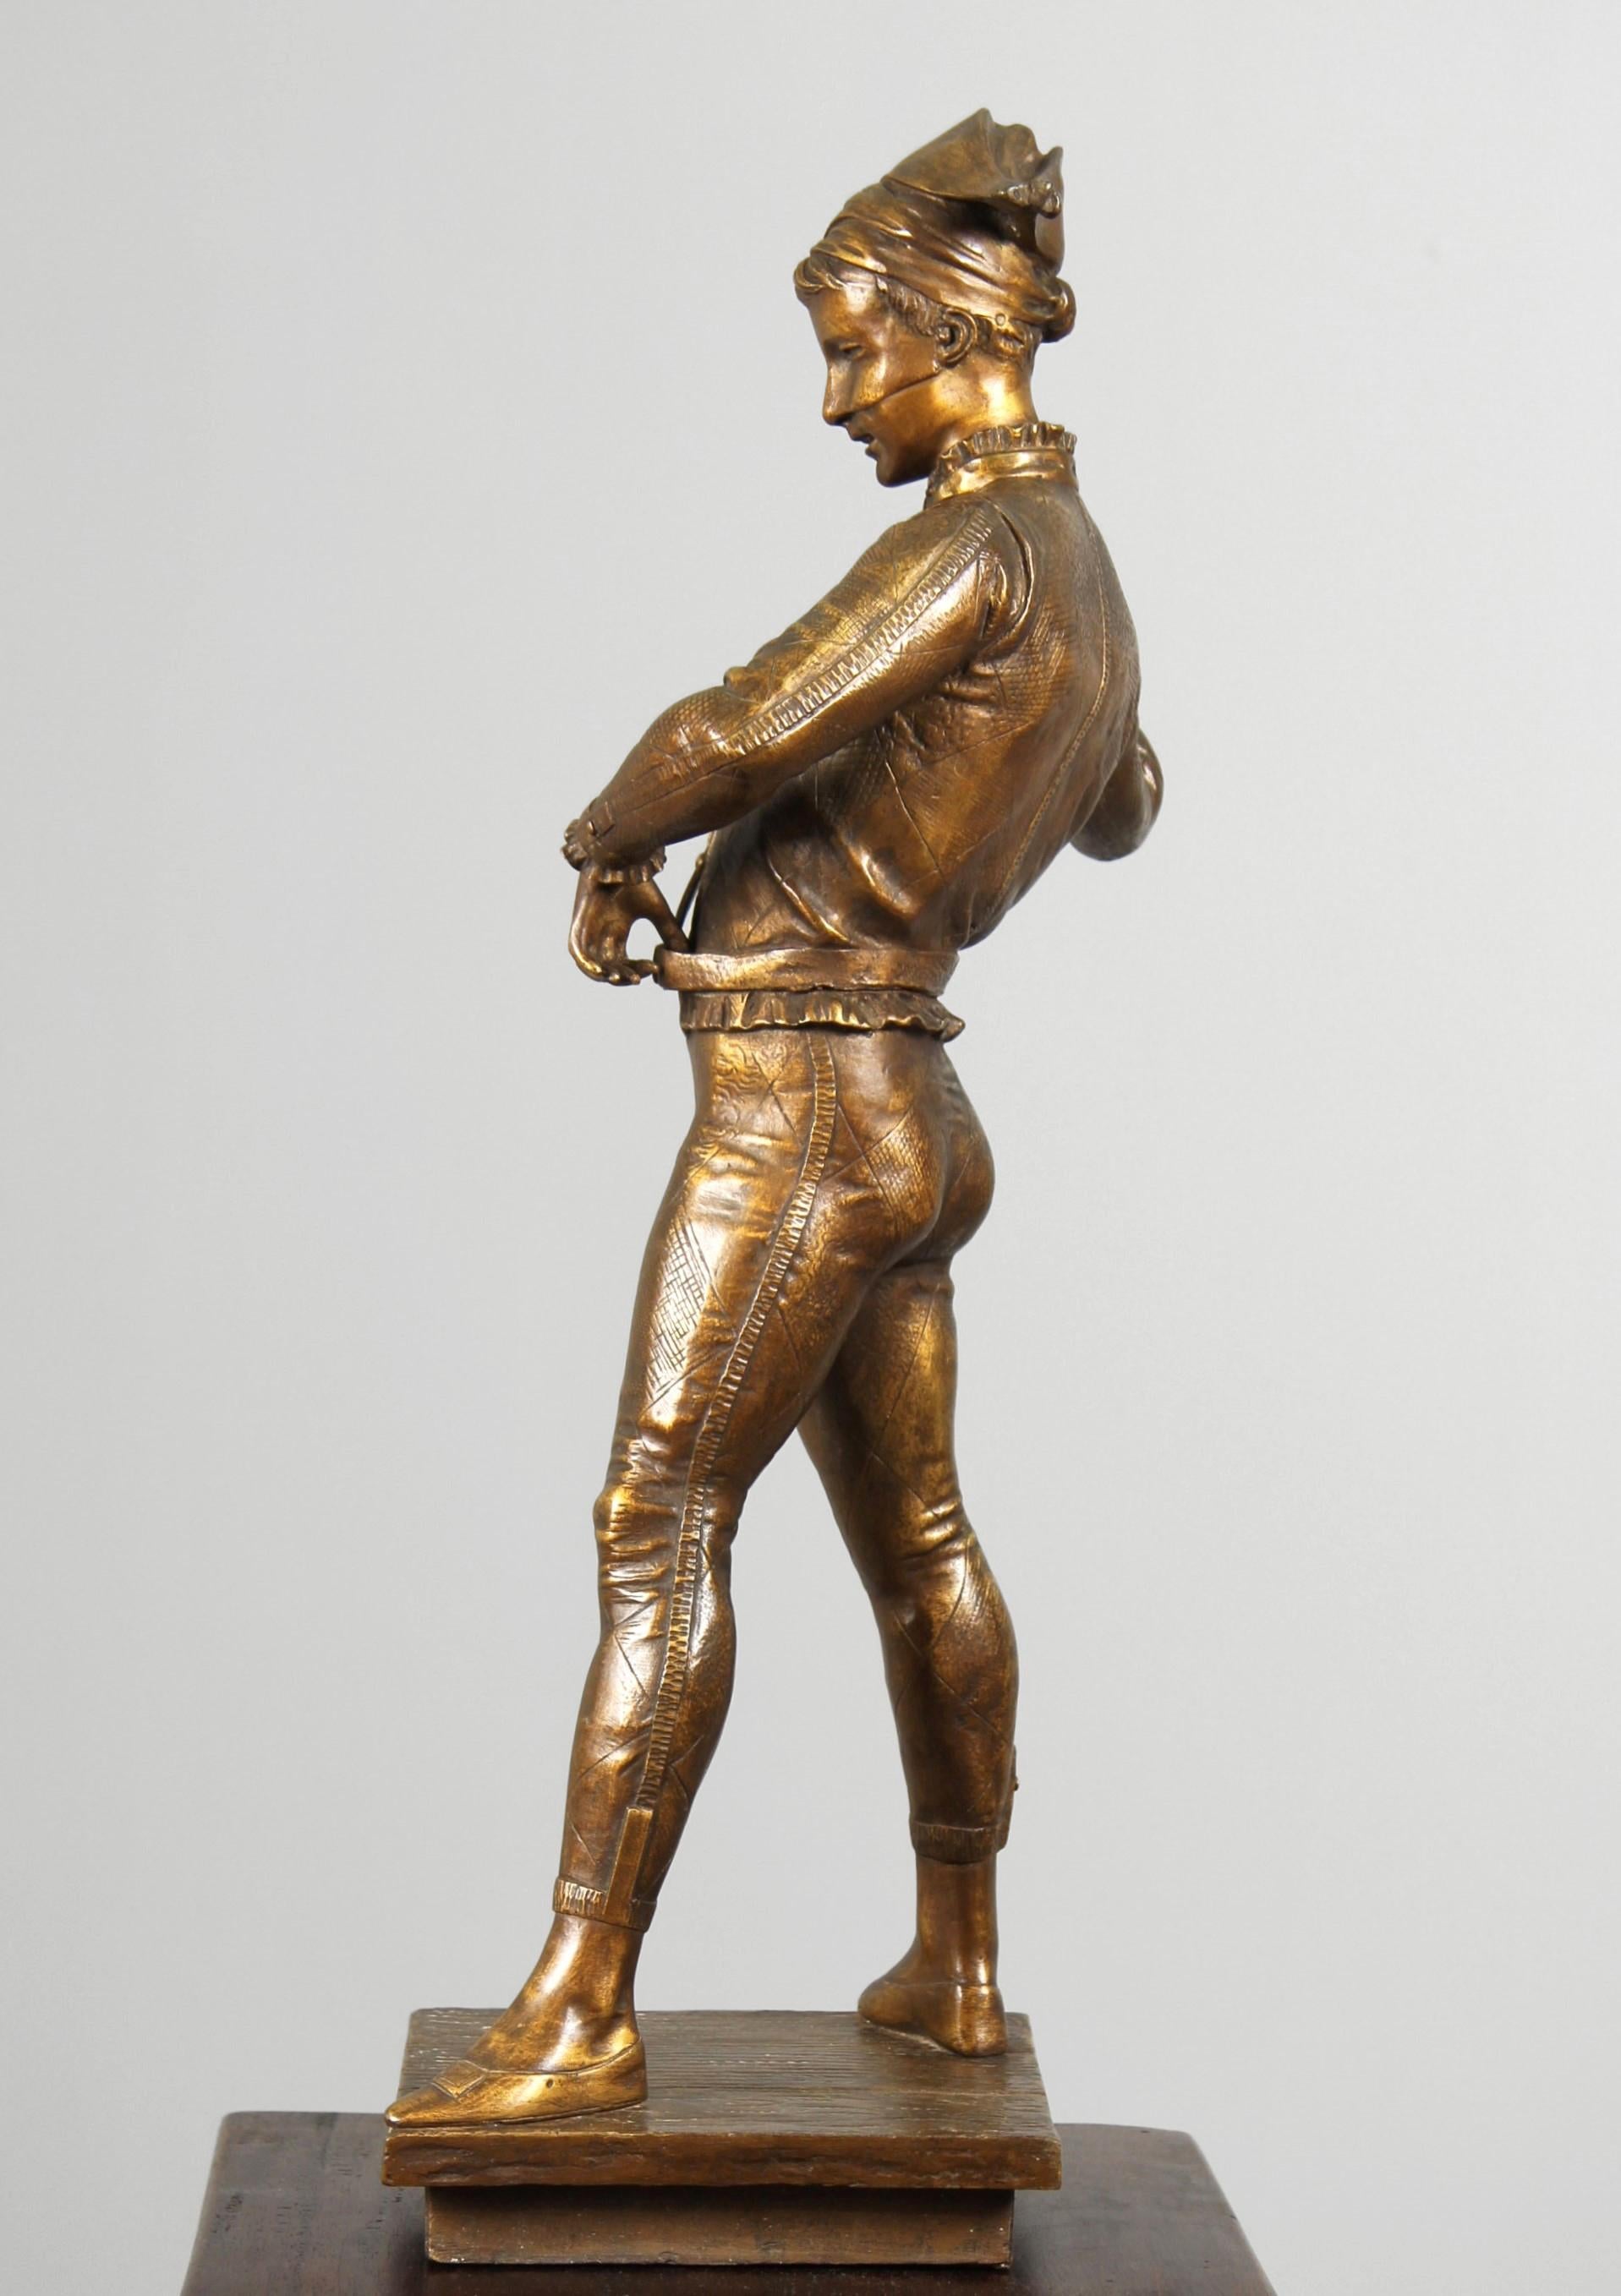 Paul Dubois - The Harlequin

France
bronze
around 1880

Dimensions: H x W x D: 59 x 19 x 18 cm

Description:
Figure standing on an almost square base. The base, with the appearance of wooden planks arranged in a row, represents the Harlequin's